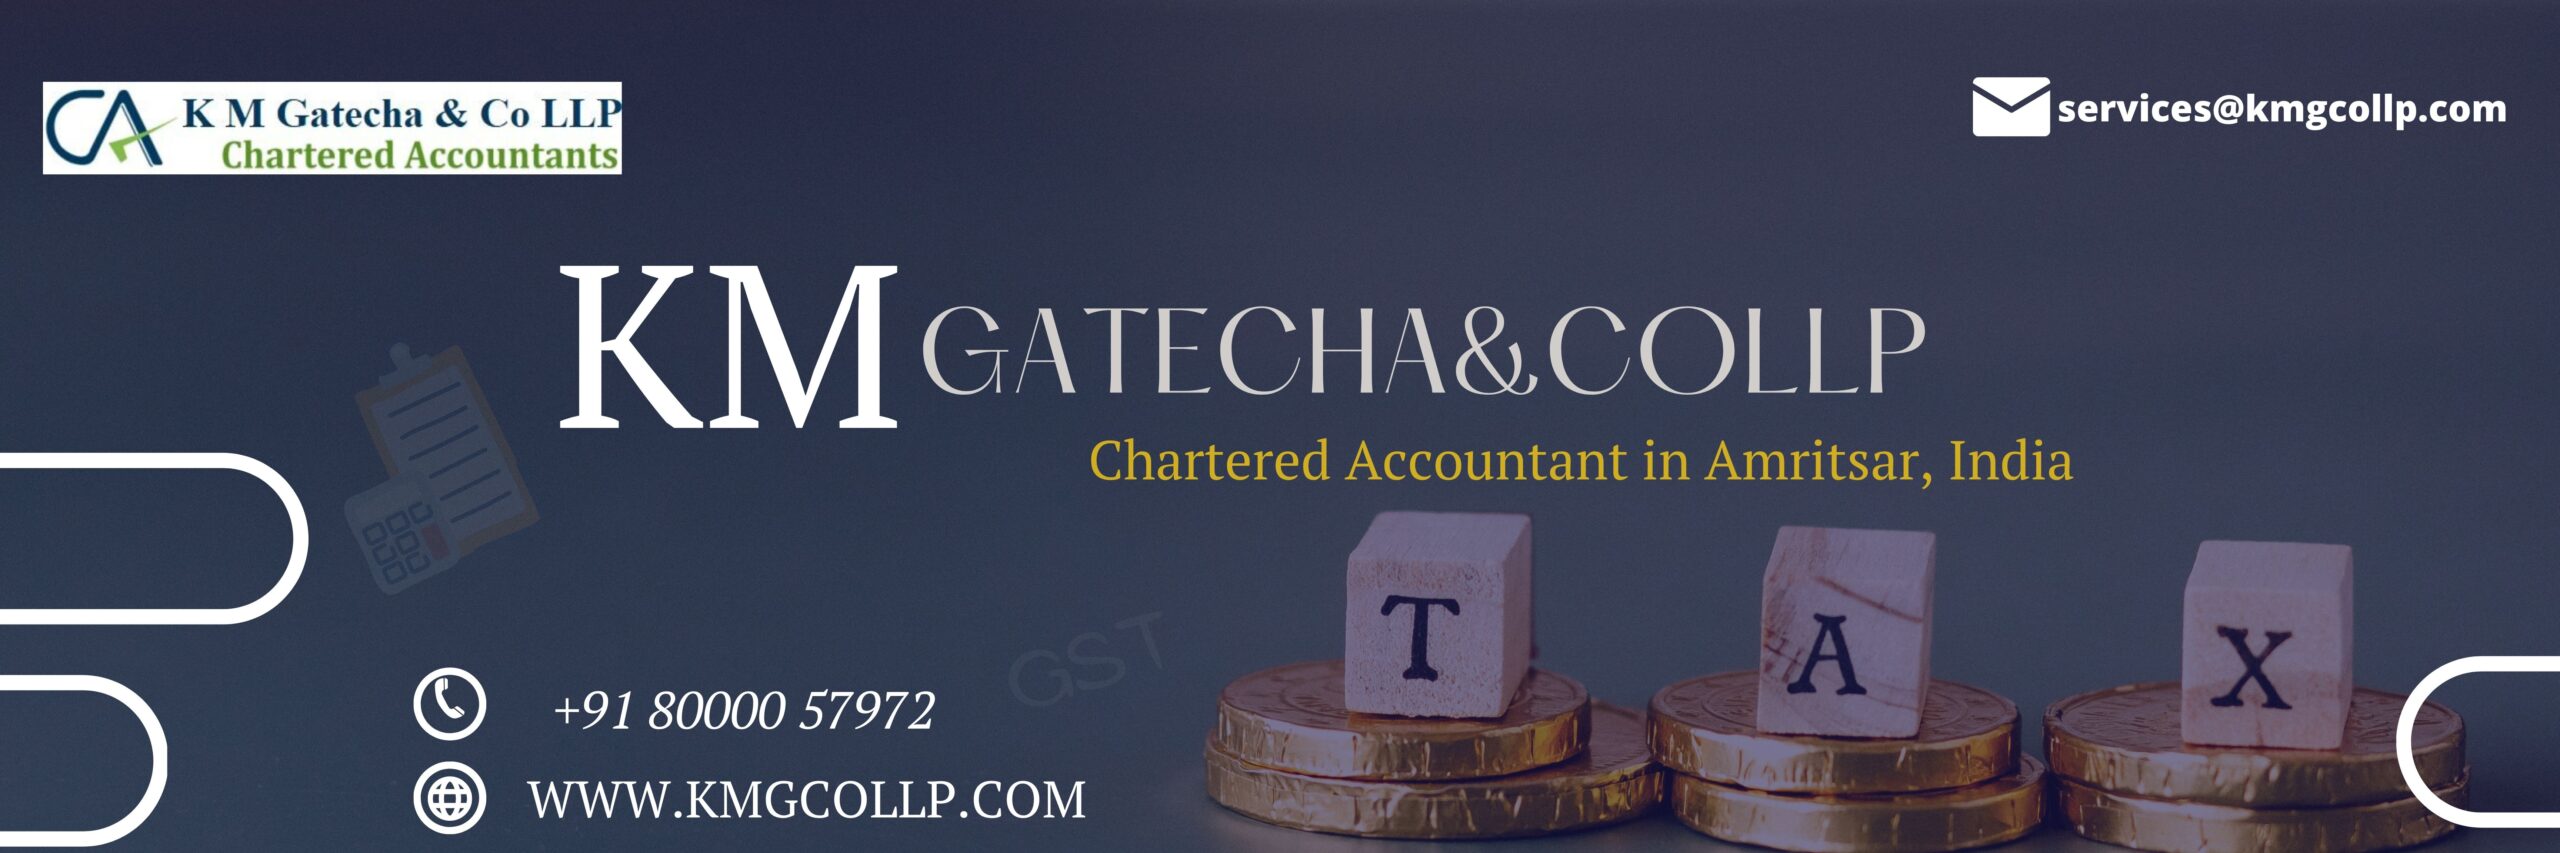 ca chartered accountant in amritsar